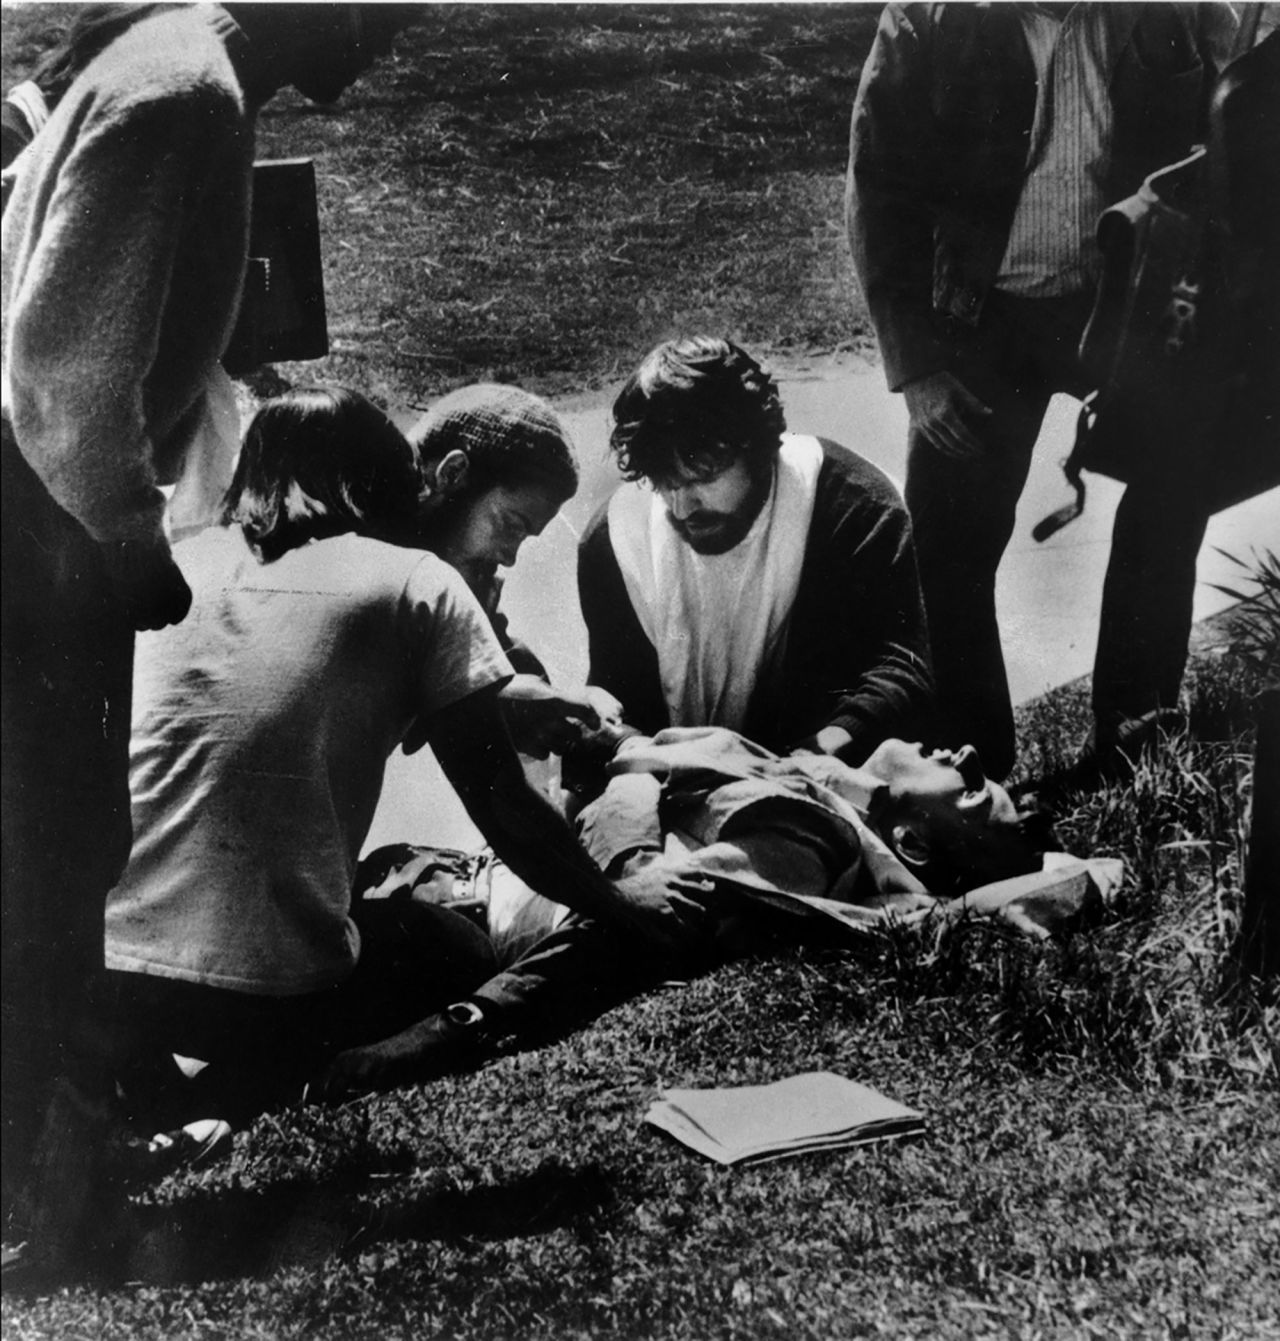 Kent State students gather around a wounded student.